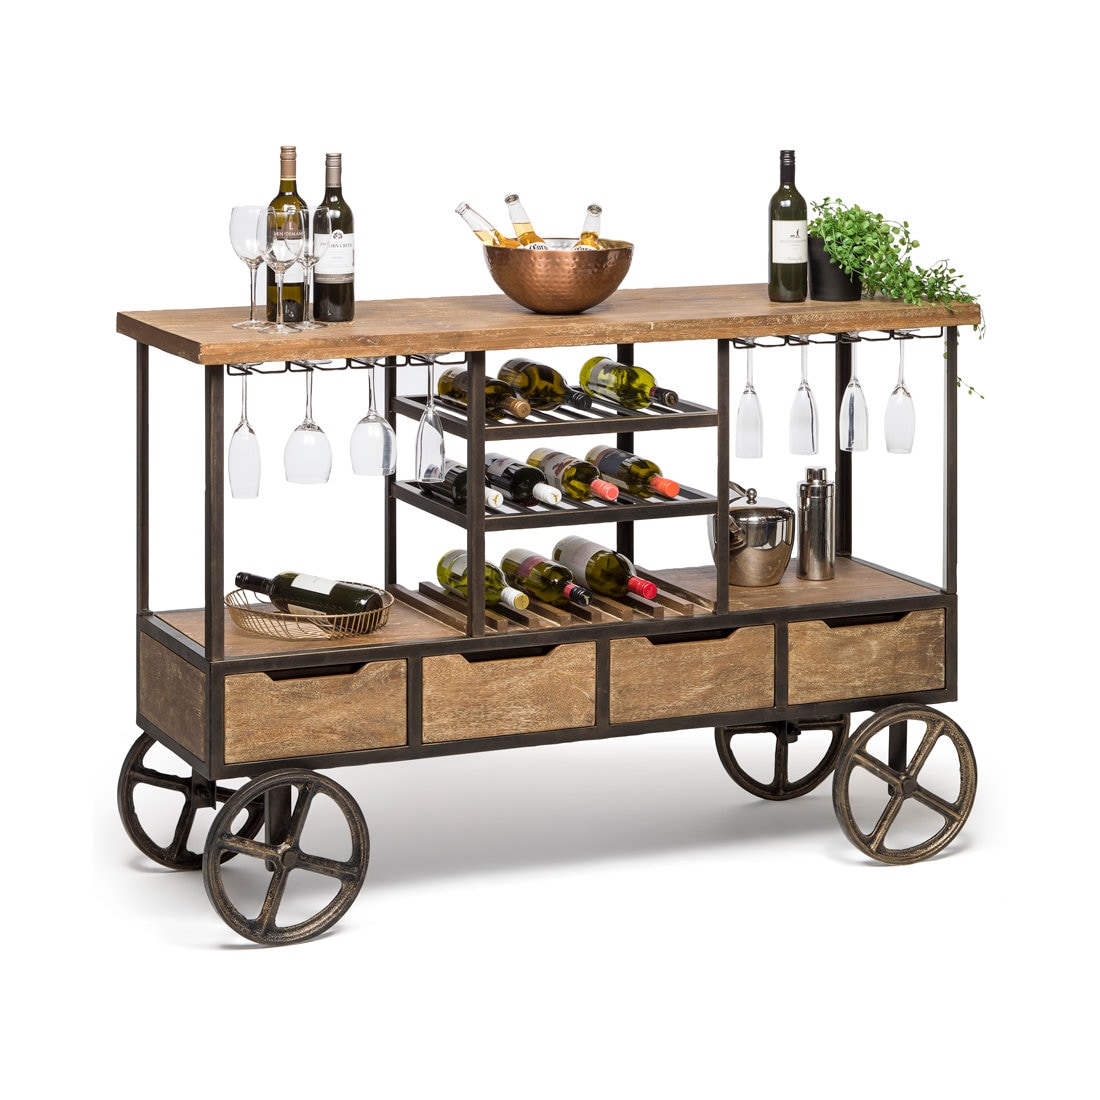 The Drinks Trolley: 15 Bar Carts To Buy and 6 Ways To Style It